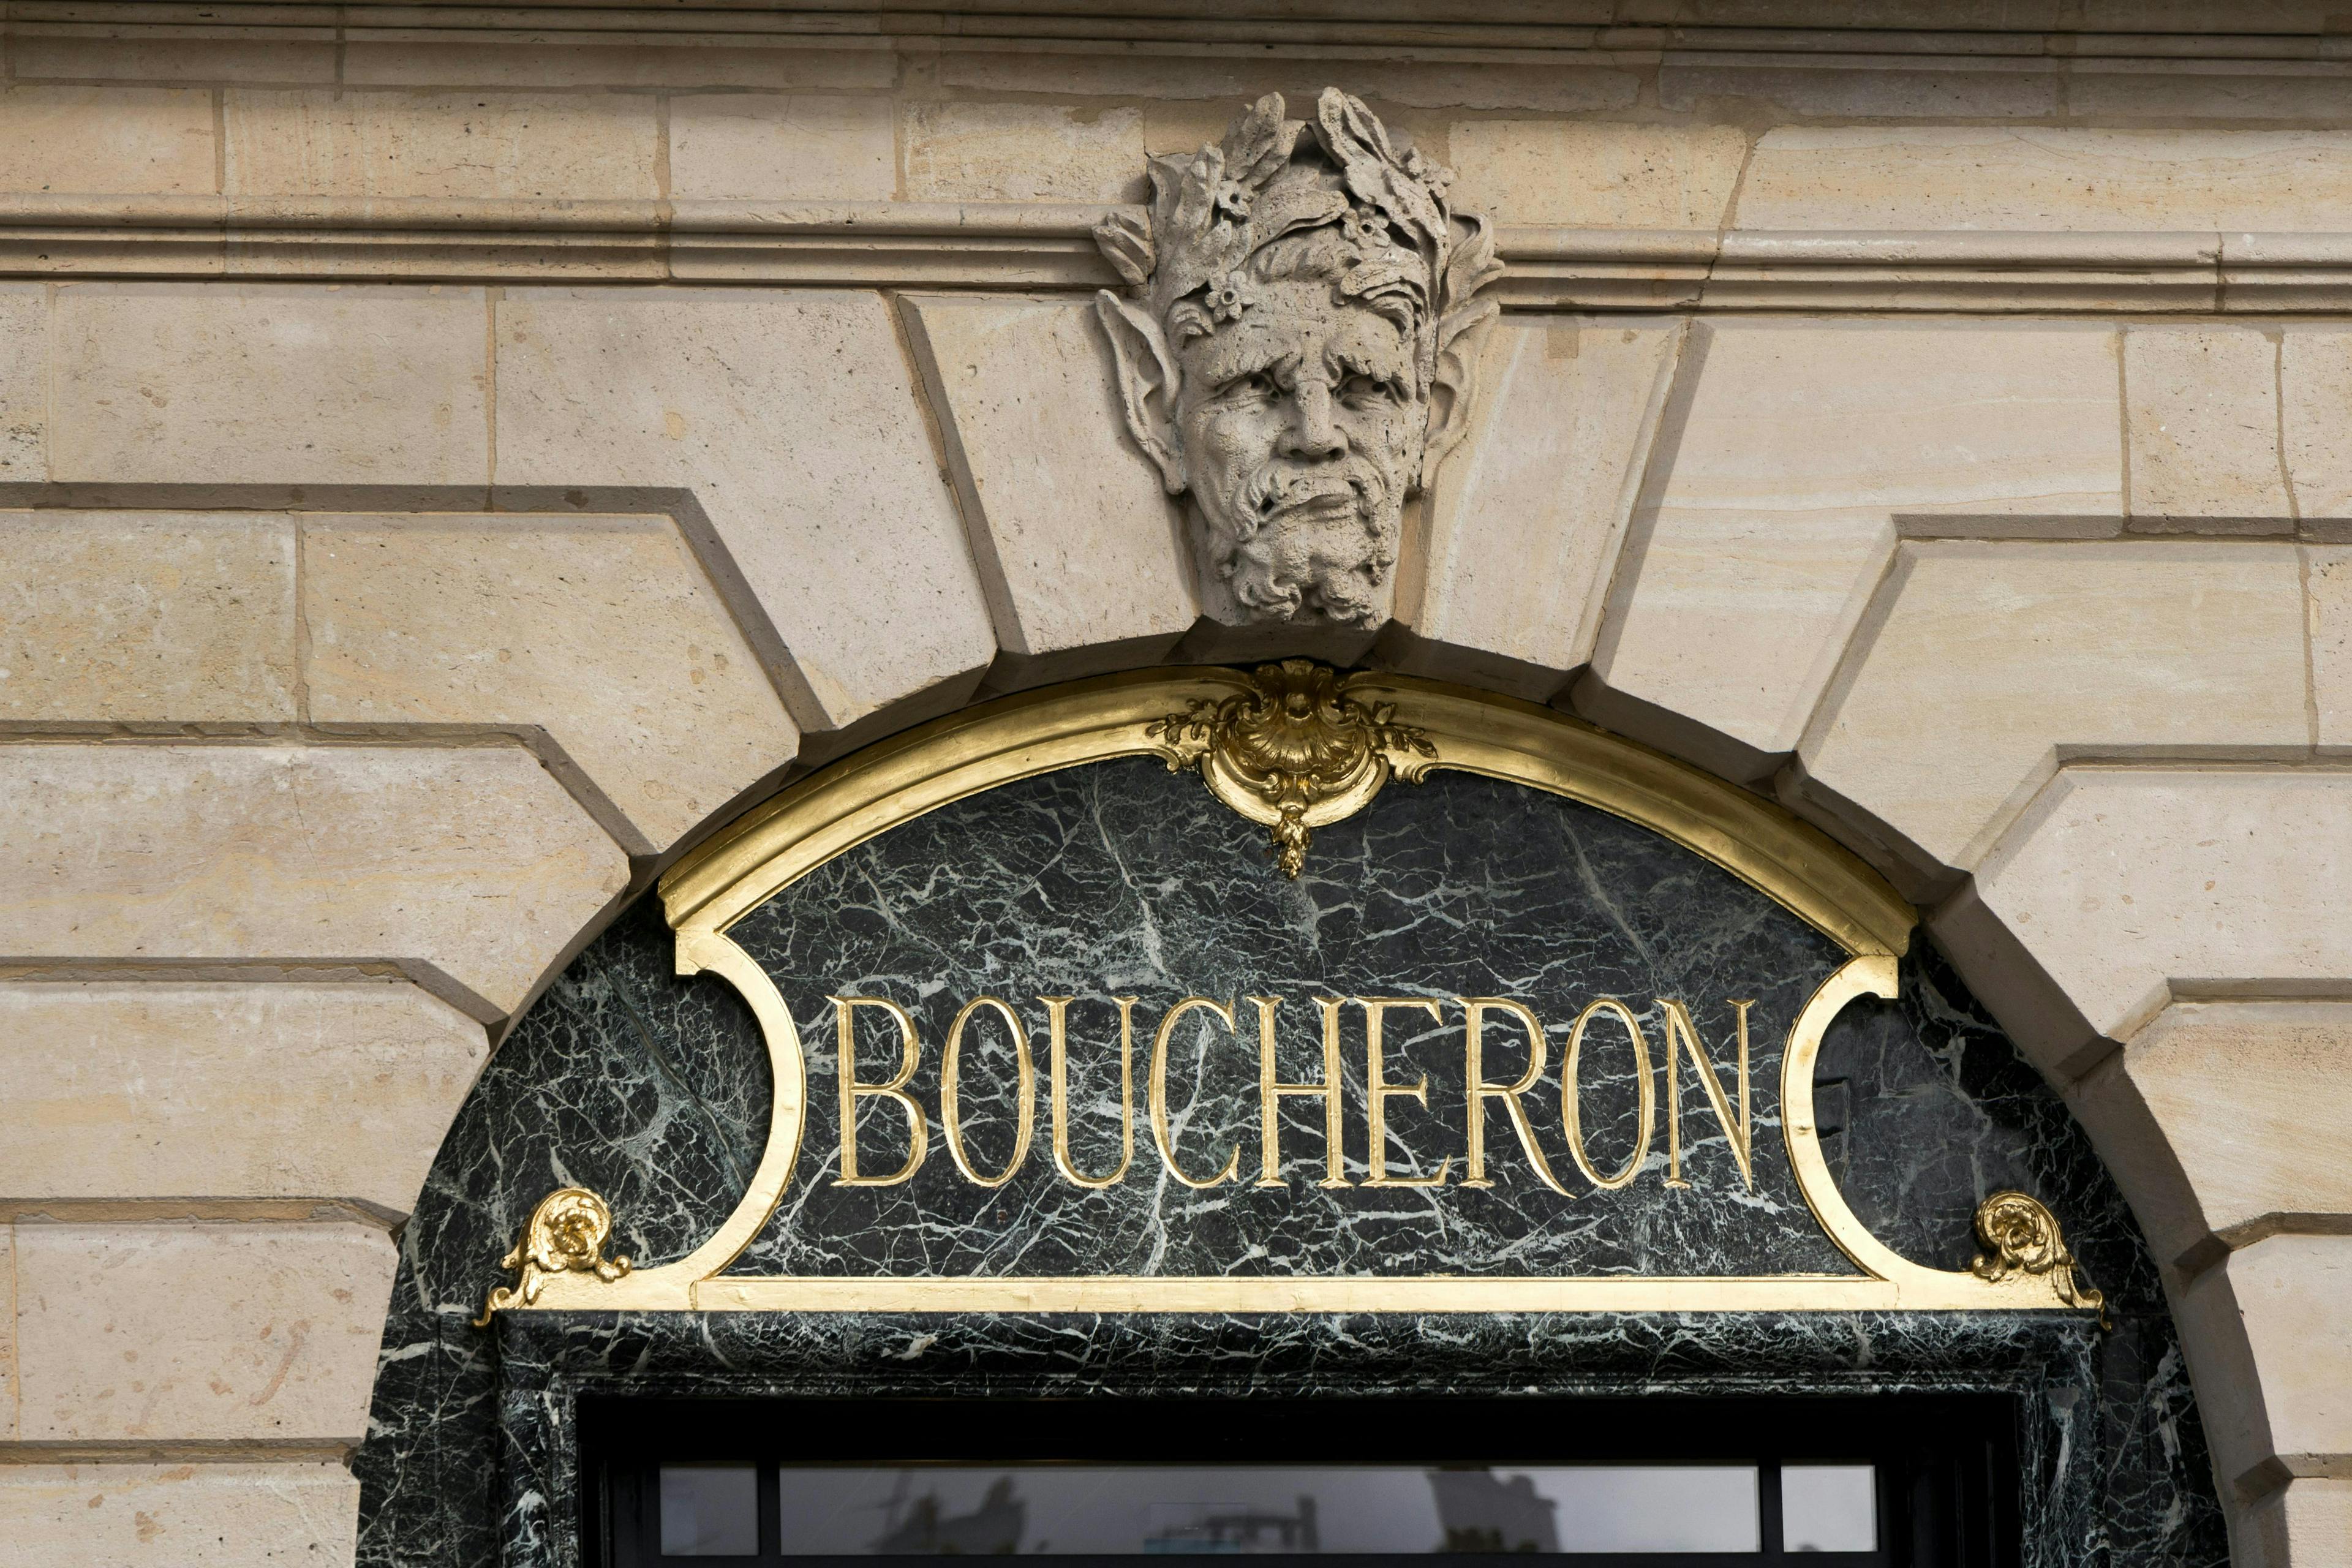 jewelry,symbol,city,icon,sign,store,urban,street,logo,text,emblem,europe,word,french,boucheron architecture building monastery arch person logo face head